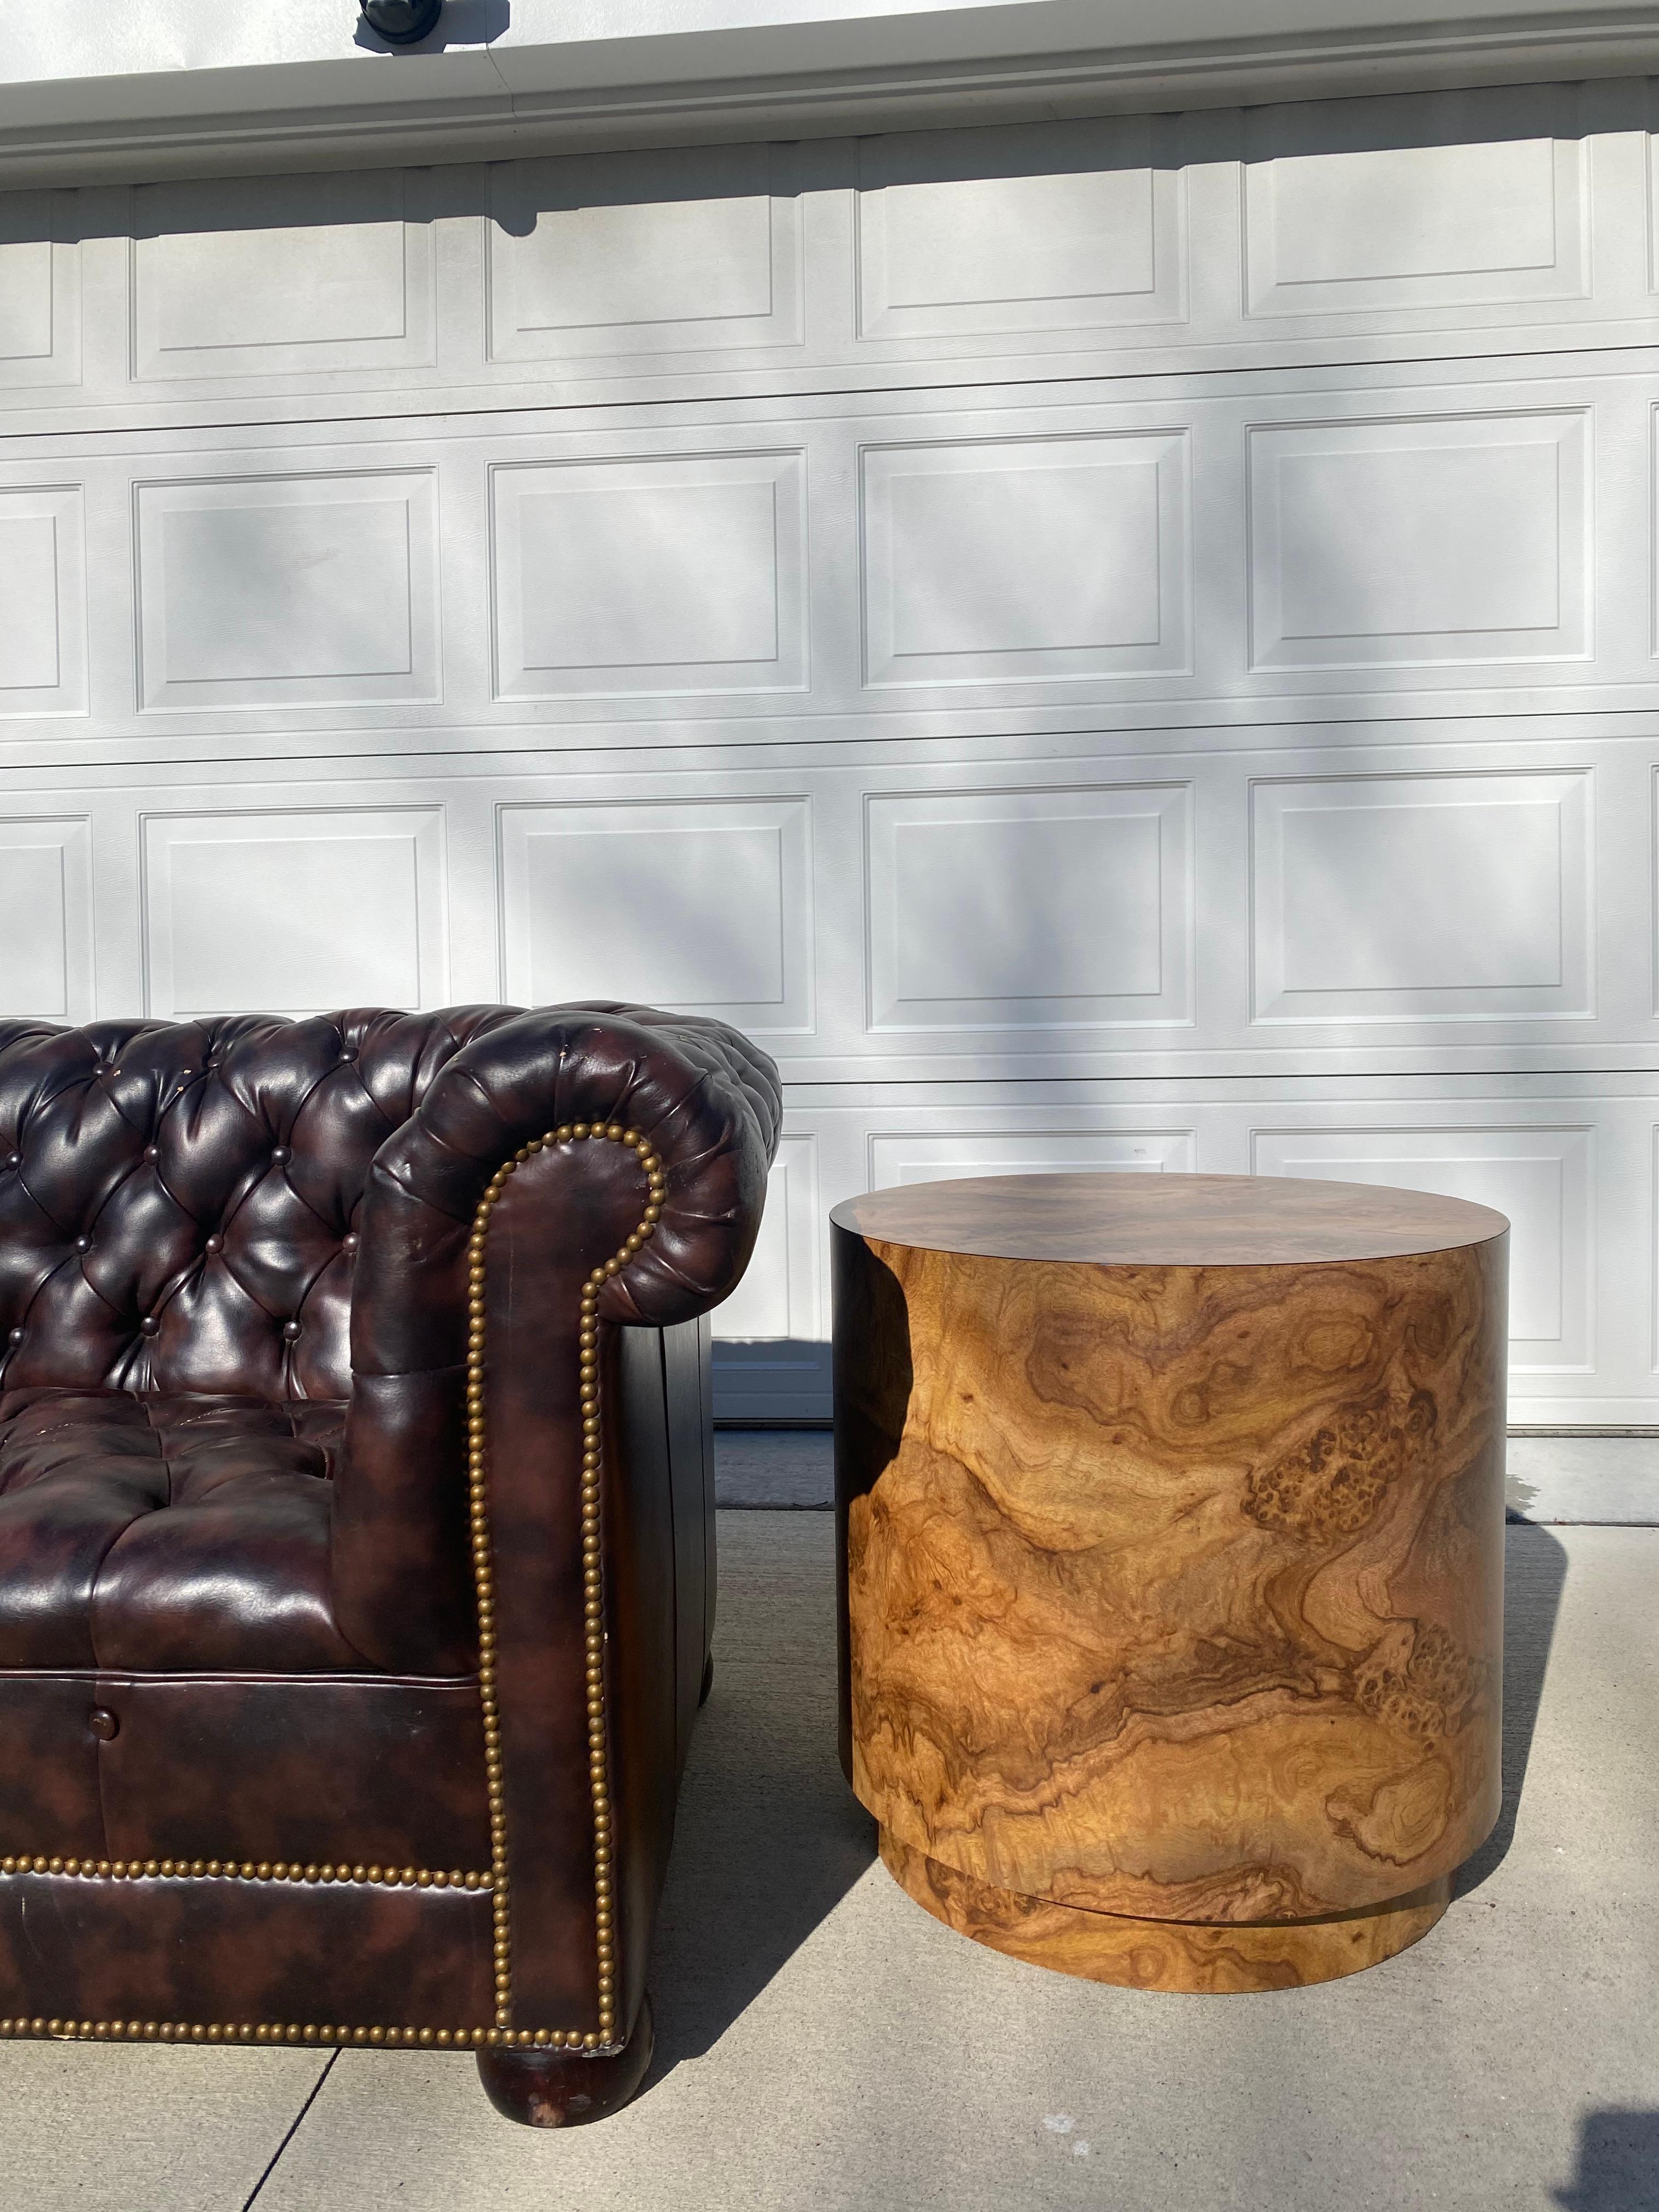 Unique Side Table or Column for Sculpture Modern Milo Baughman Style. In almost perfect condition, see pictures. There is a imperfection on the bottom where he laminate is coming off, see picture. It is a really cool side table or sculpture to add